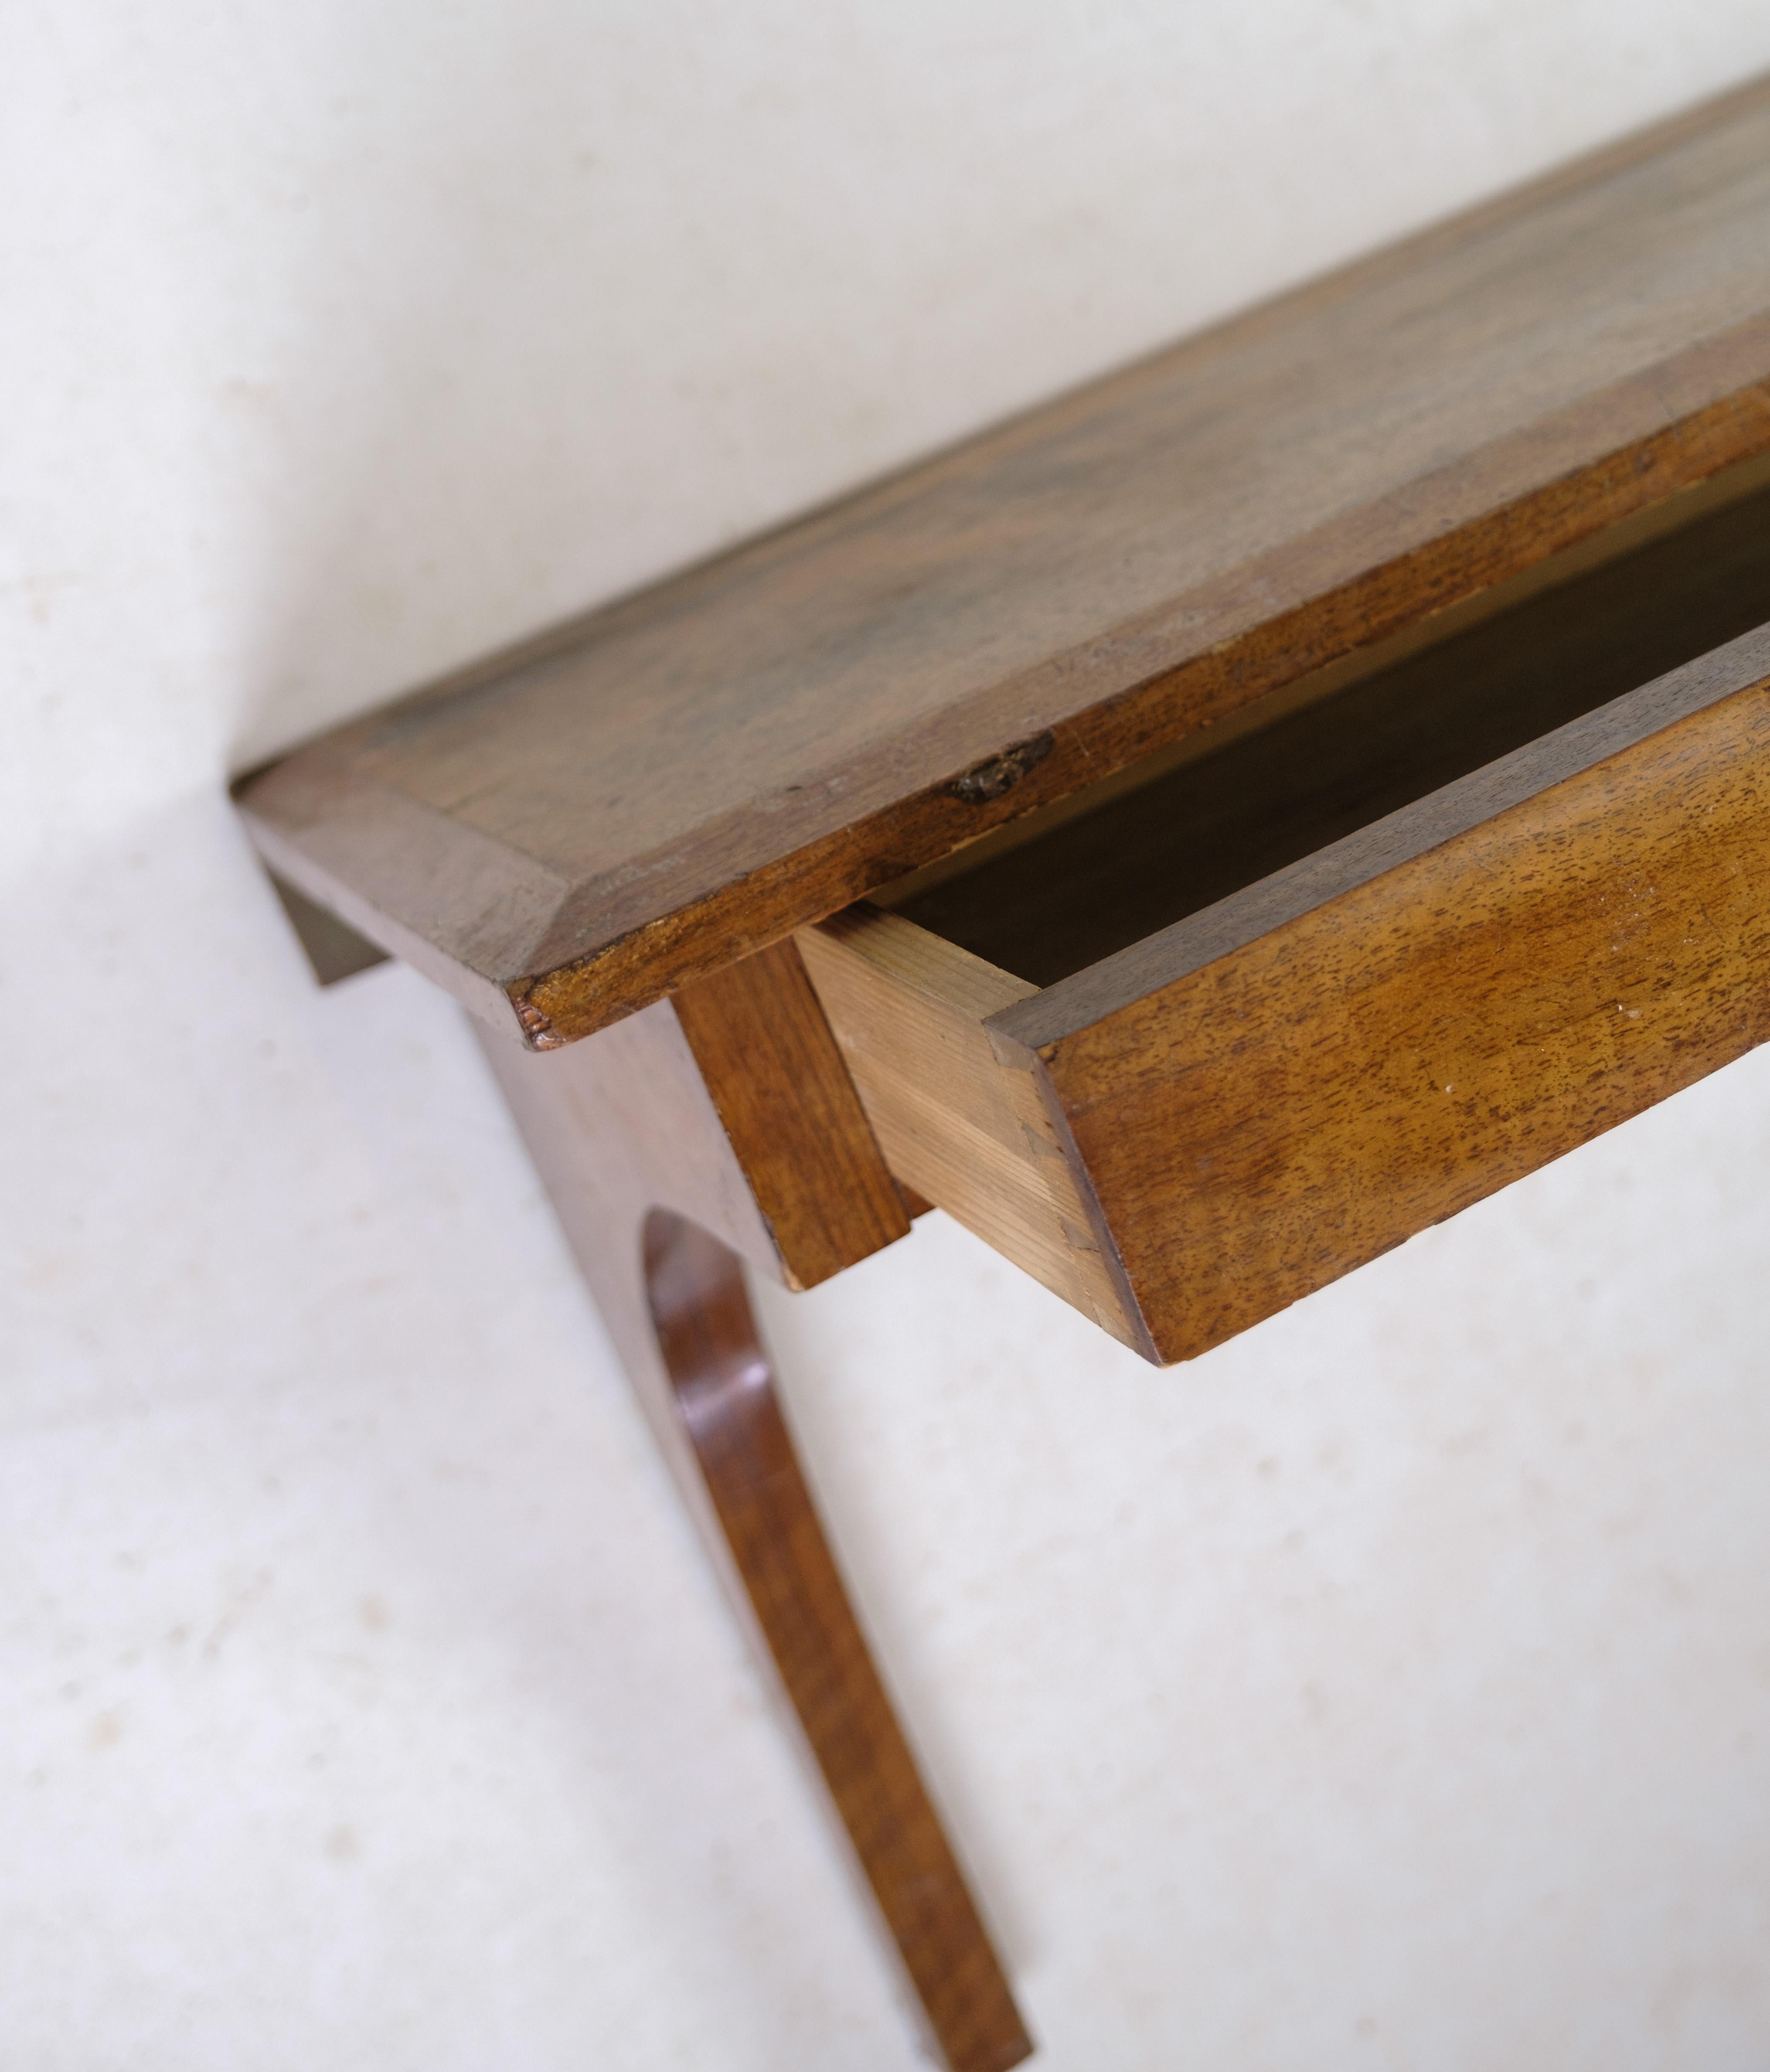 Danish Suspended wall console with a Drawer in Walnut from the 1920